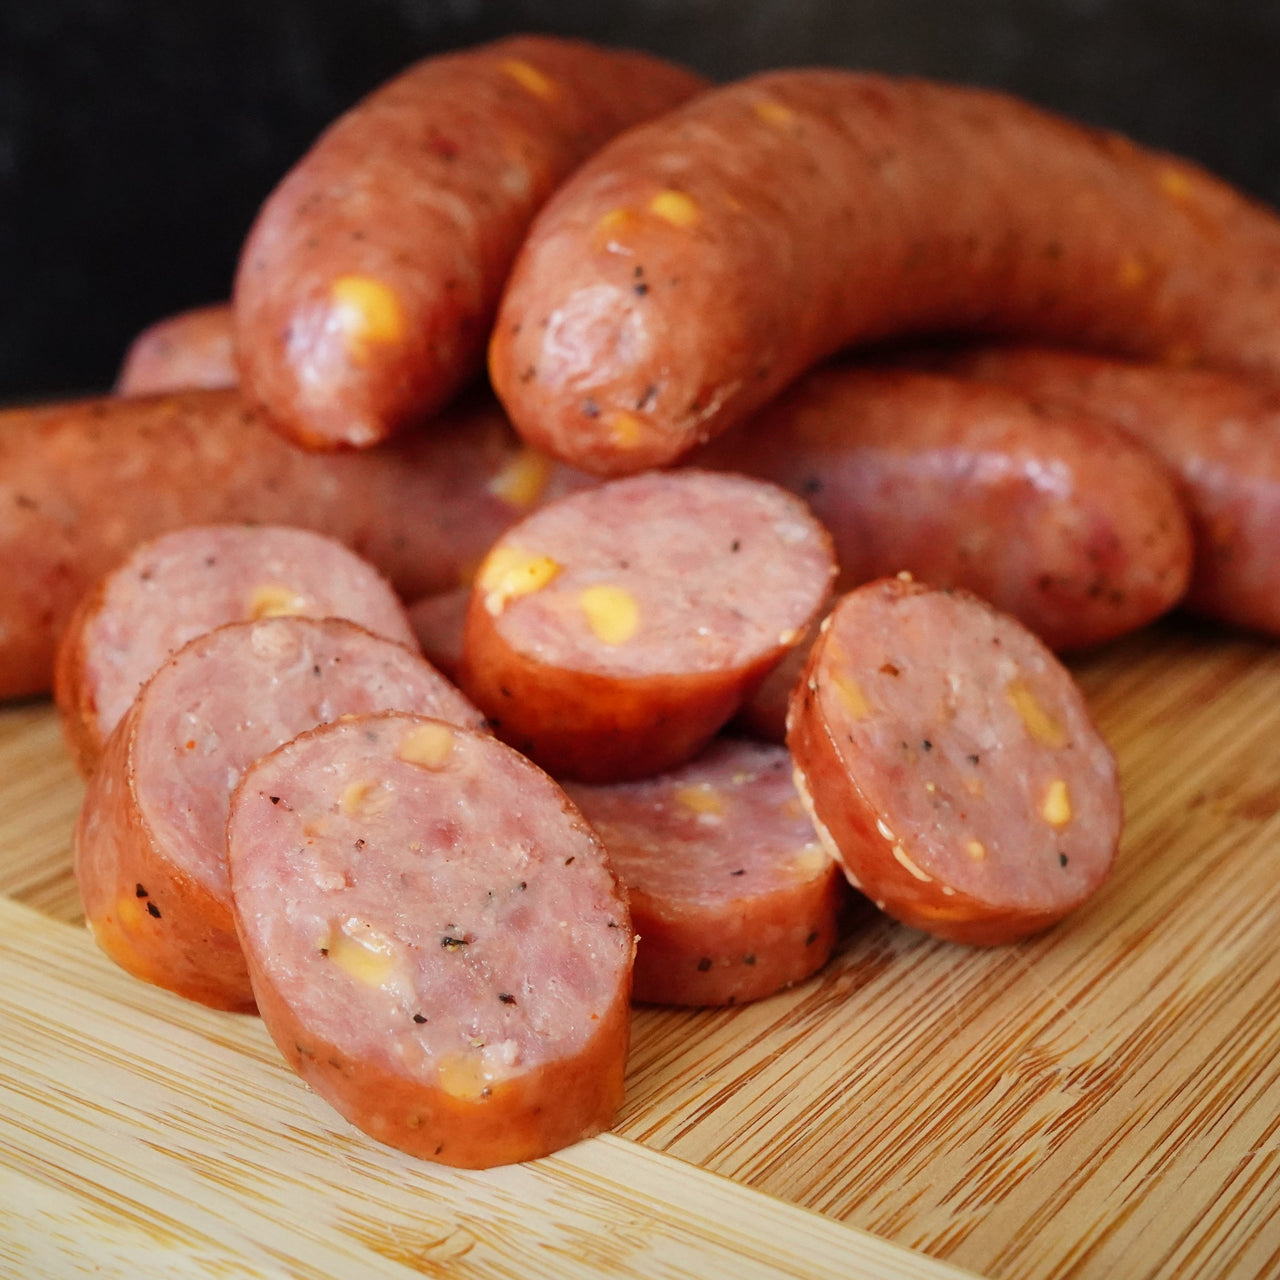 Cheddar Sausage 3 - 1 lb. Packages